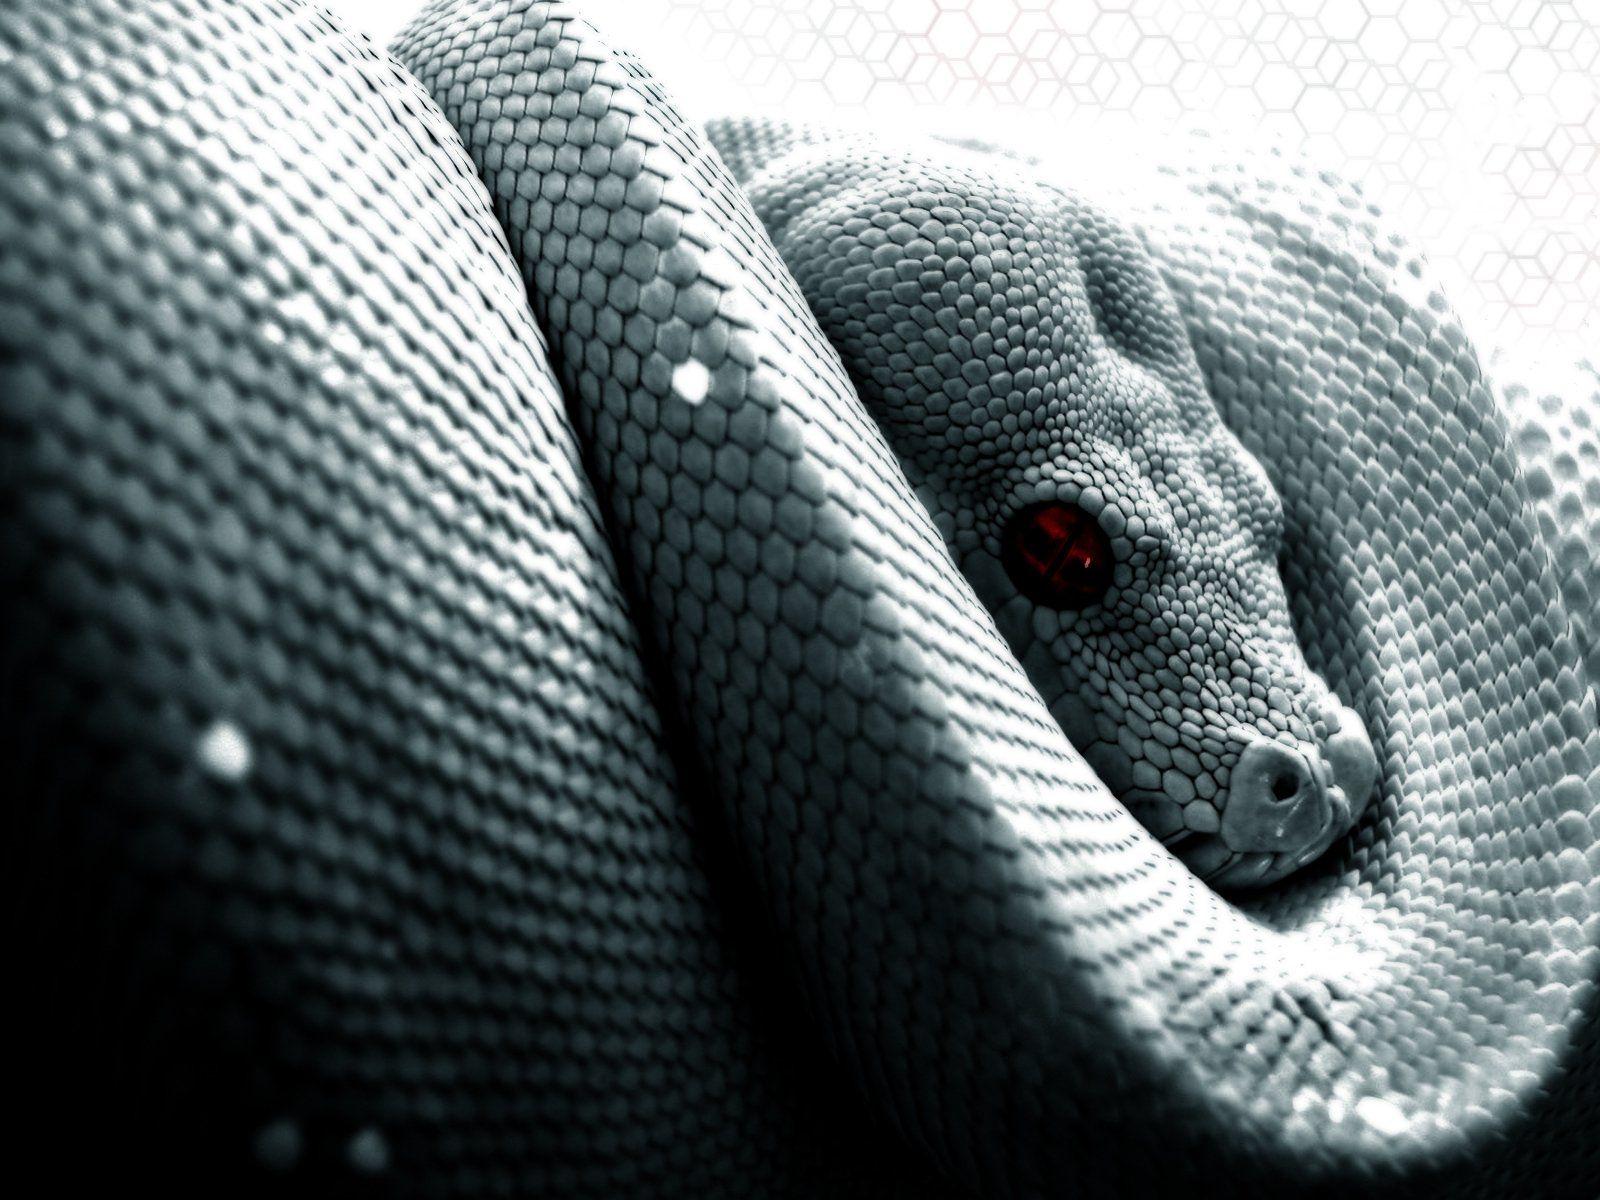 Snake HD Wallpaper and Background Image